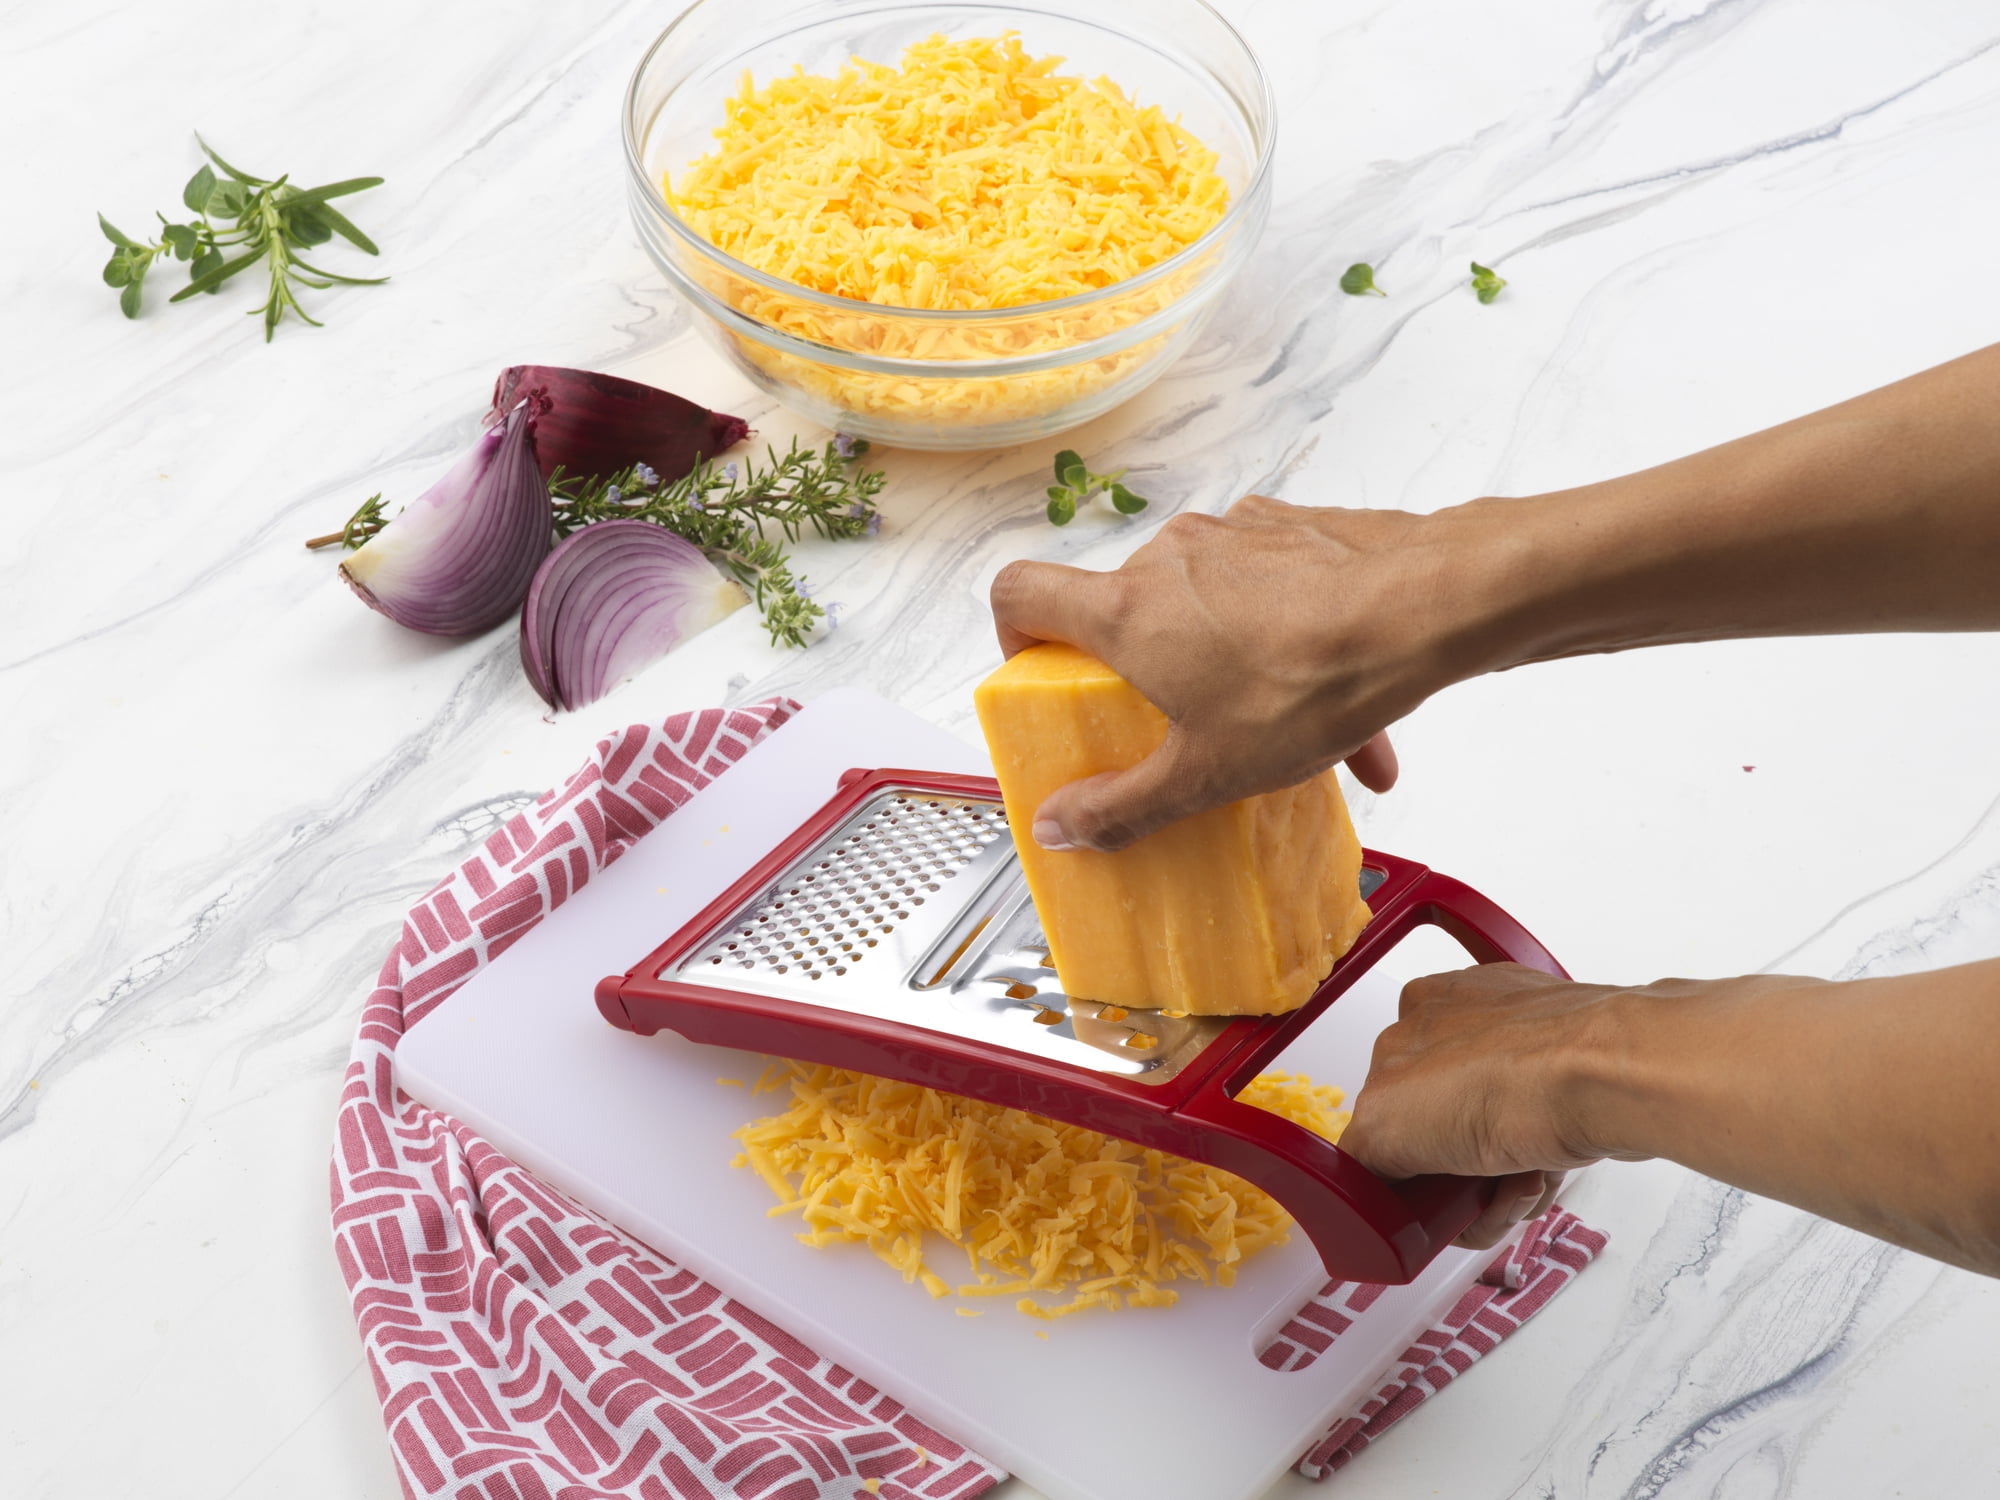 GoodCook Touch Folding Grater, Dual Sided Blades with Comfort